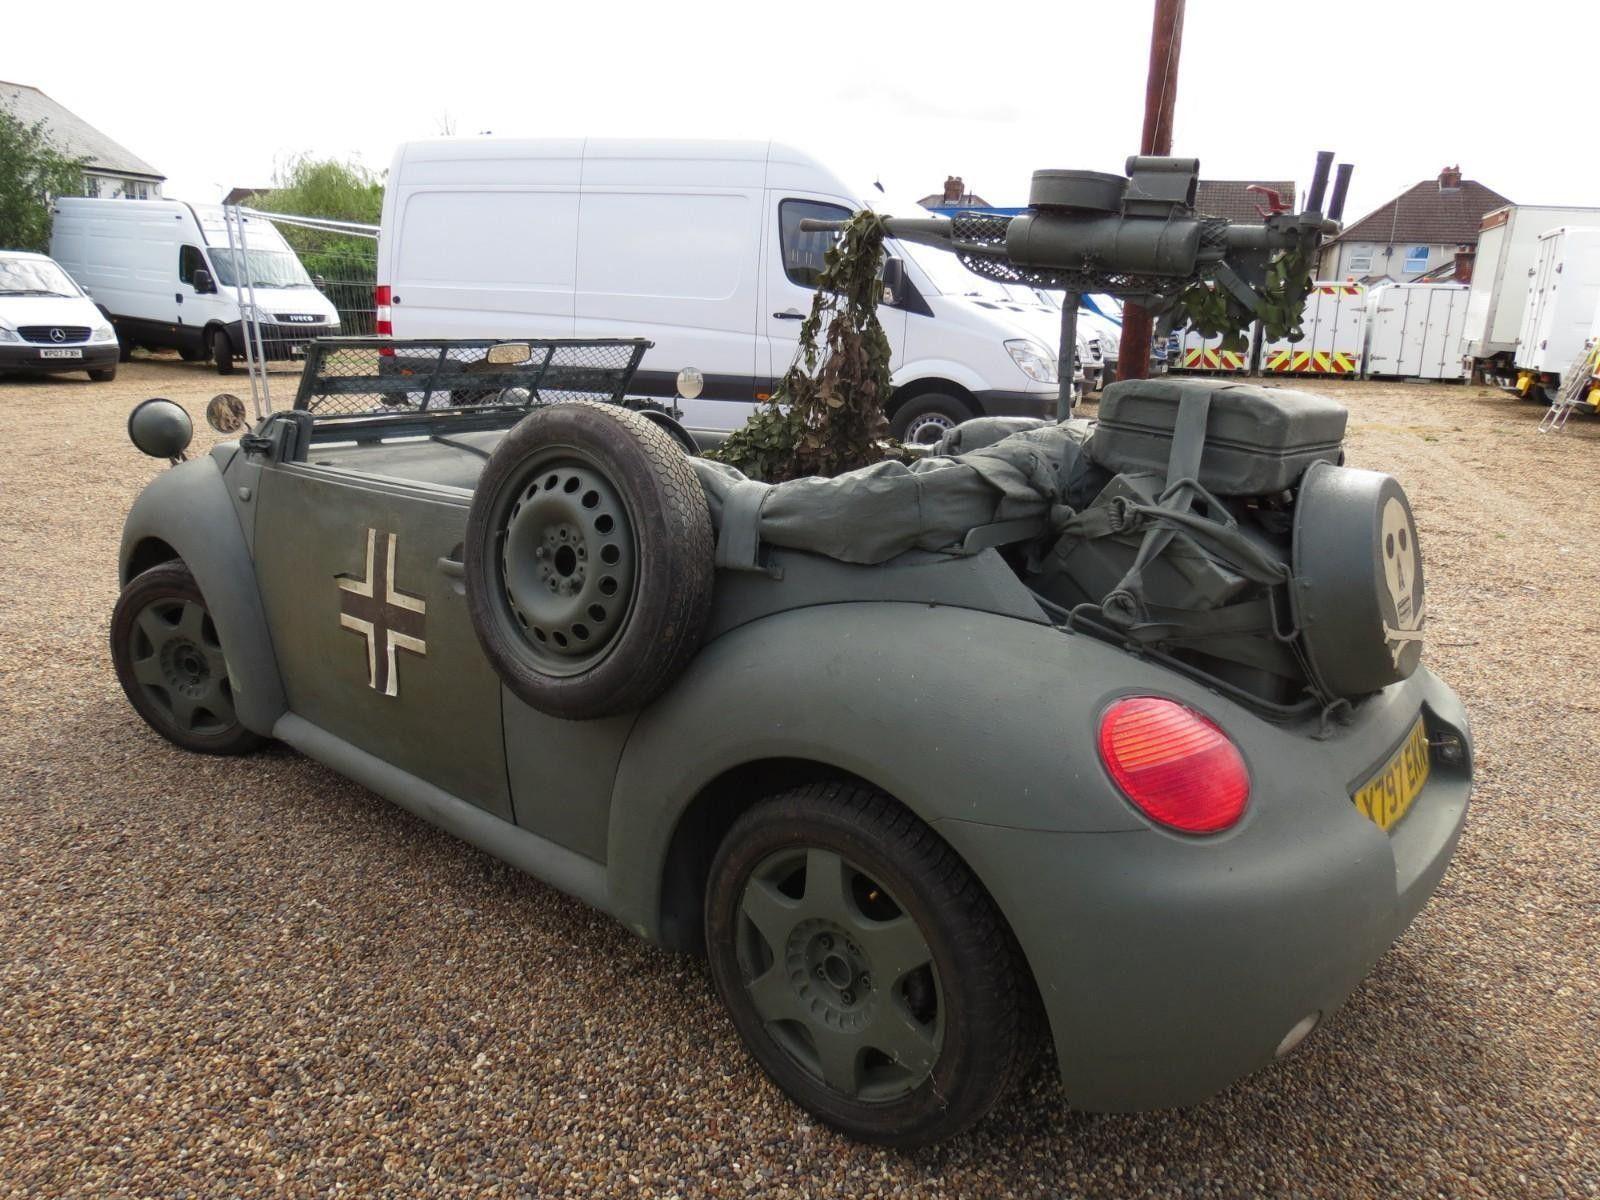 WWII VW Logo - Prepare To Invade Poland With This WWII Inspired VW Beetle Cabrio